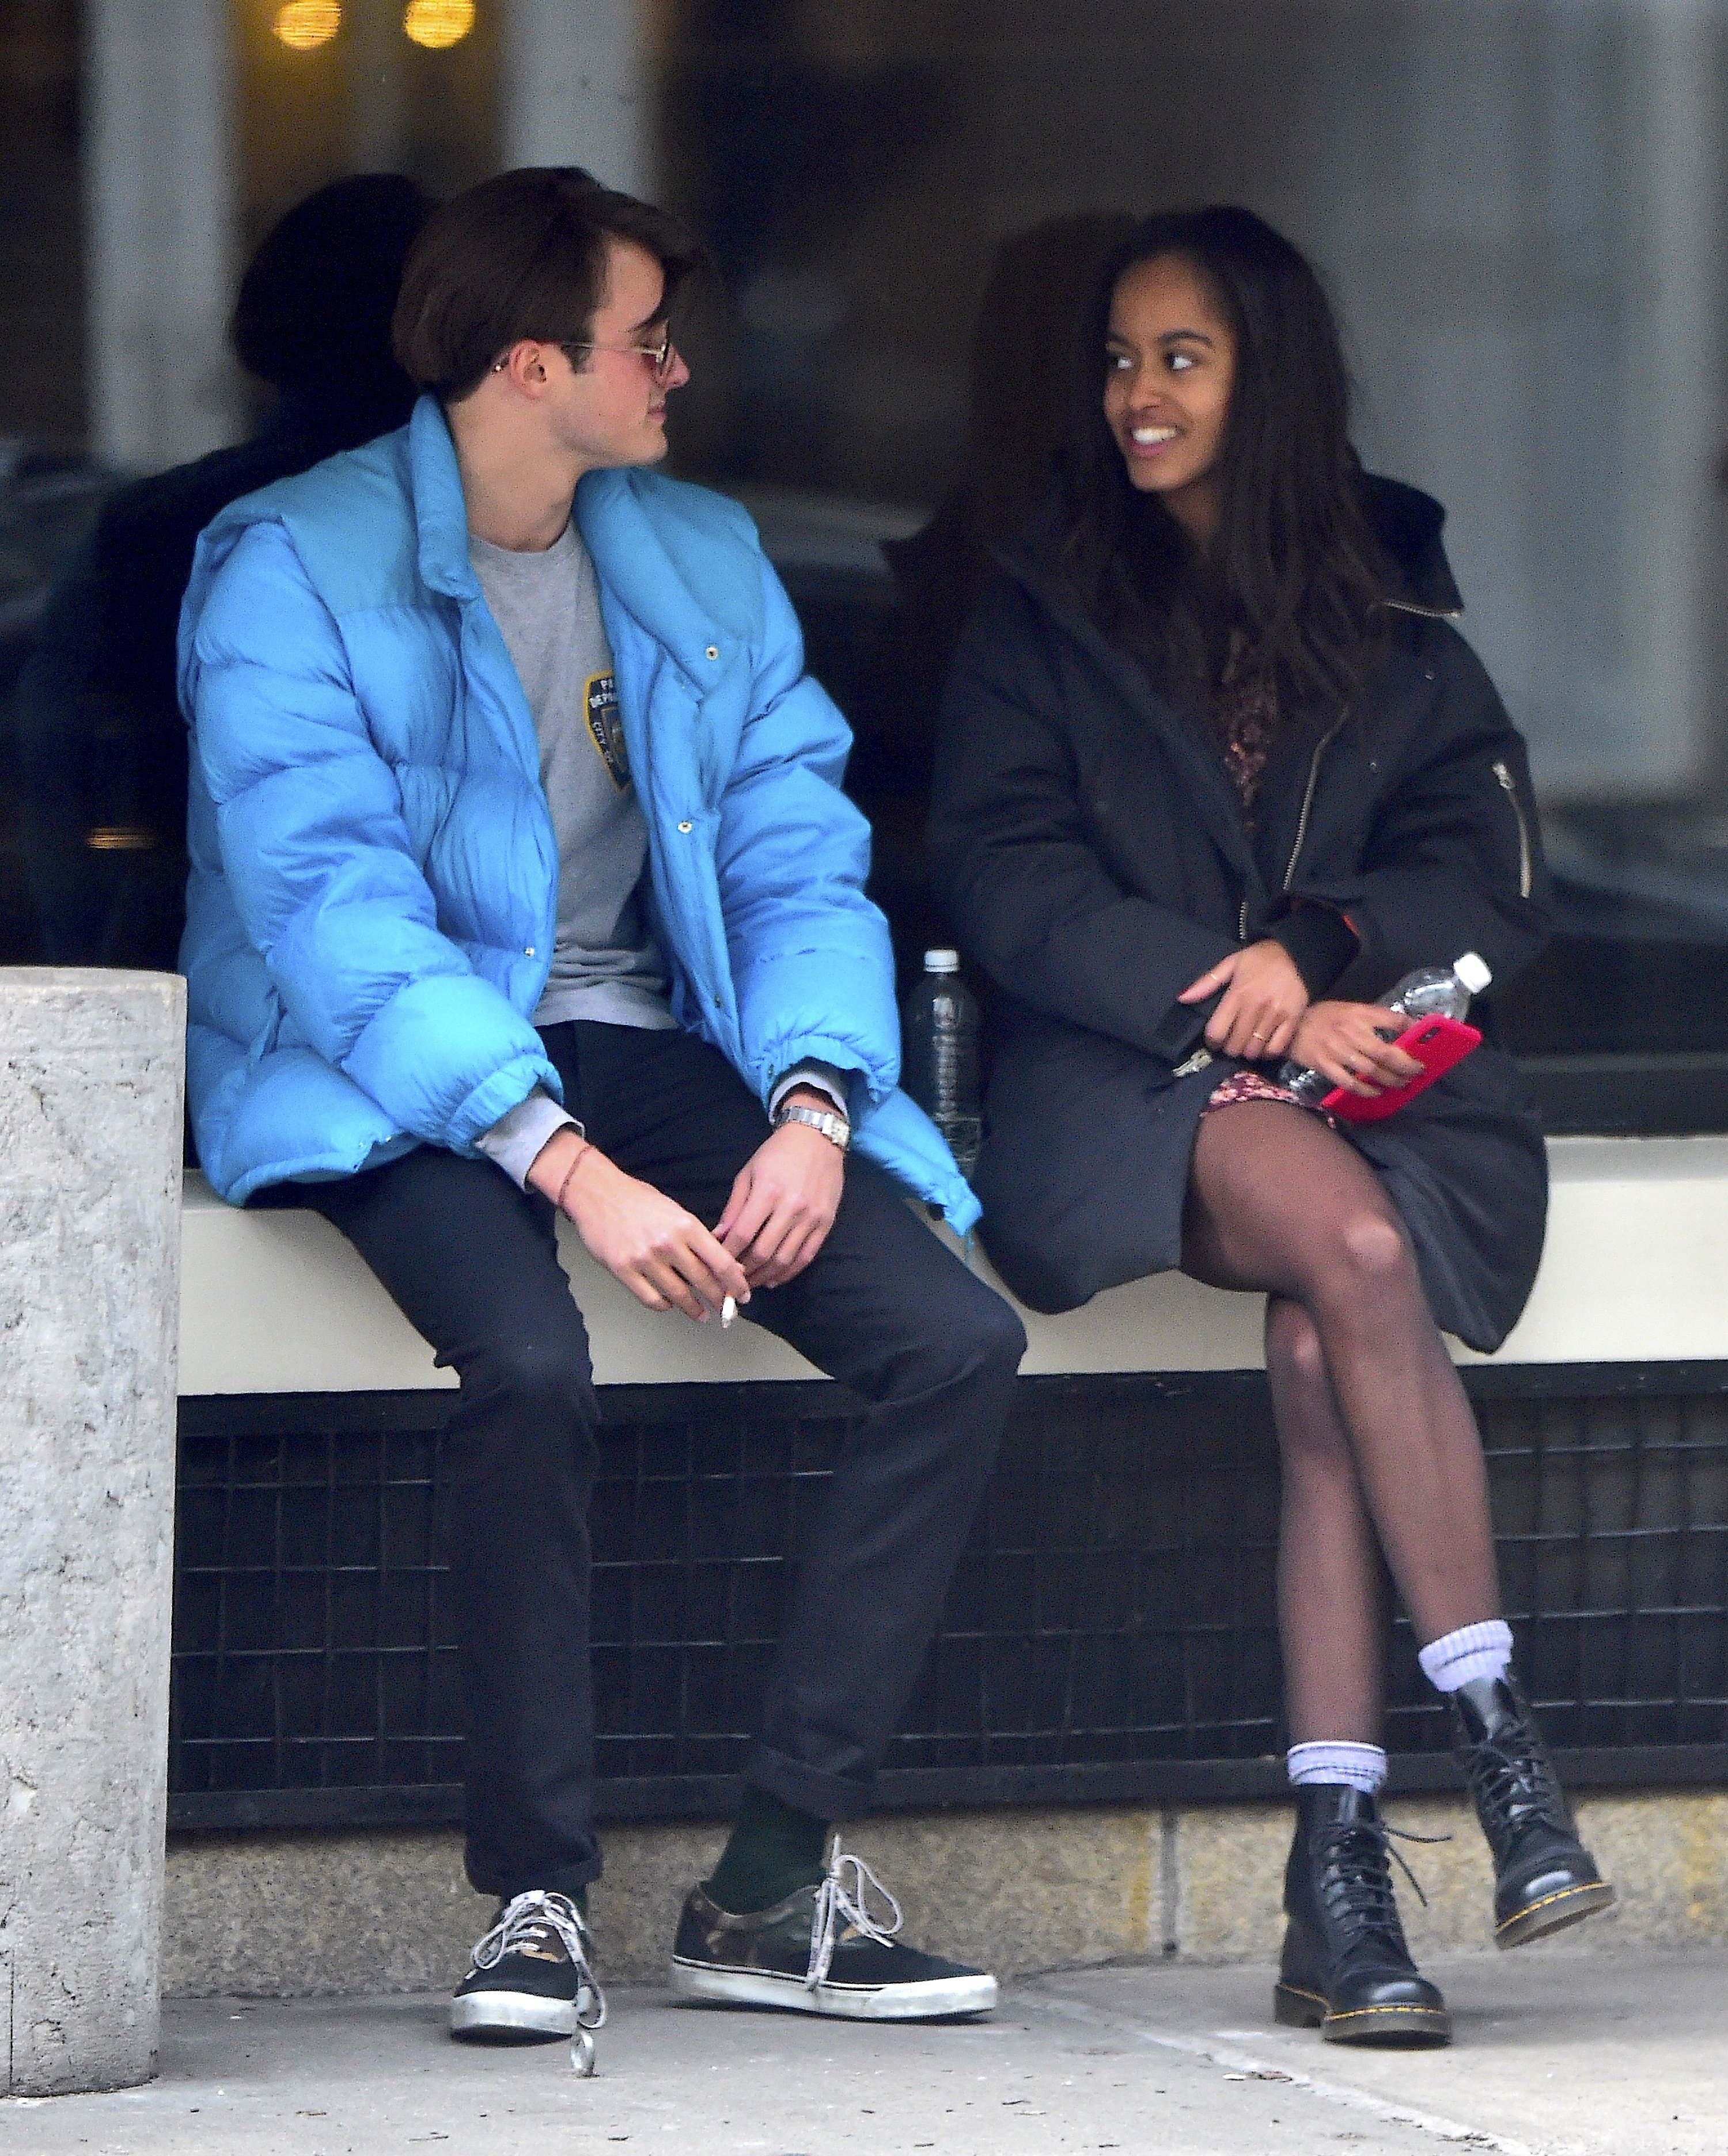 Malia Obama's boyfriend, Rory Farquharson, is seen with her on January 20, 2018 in New York City. 